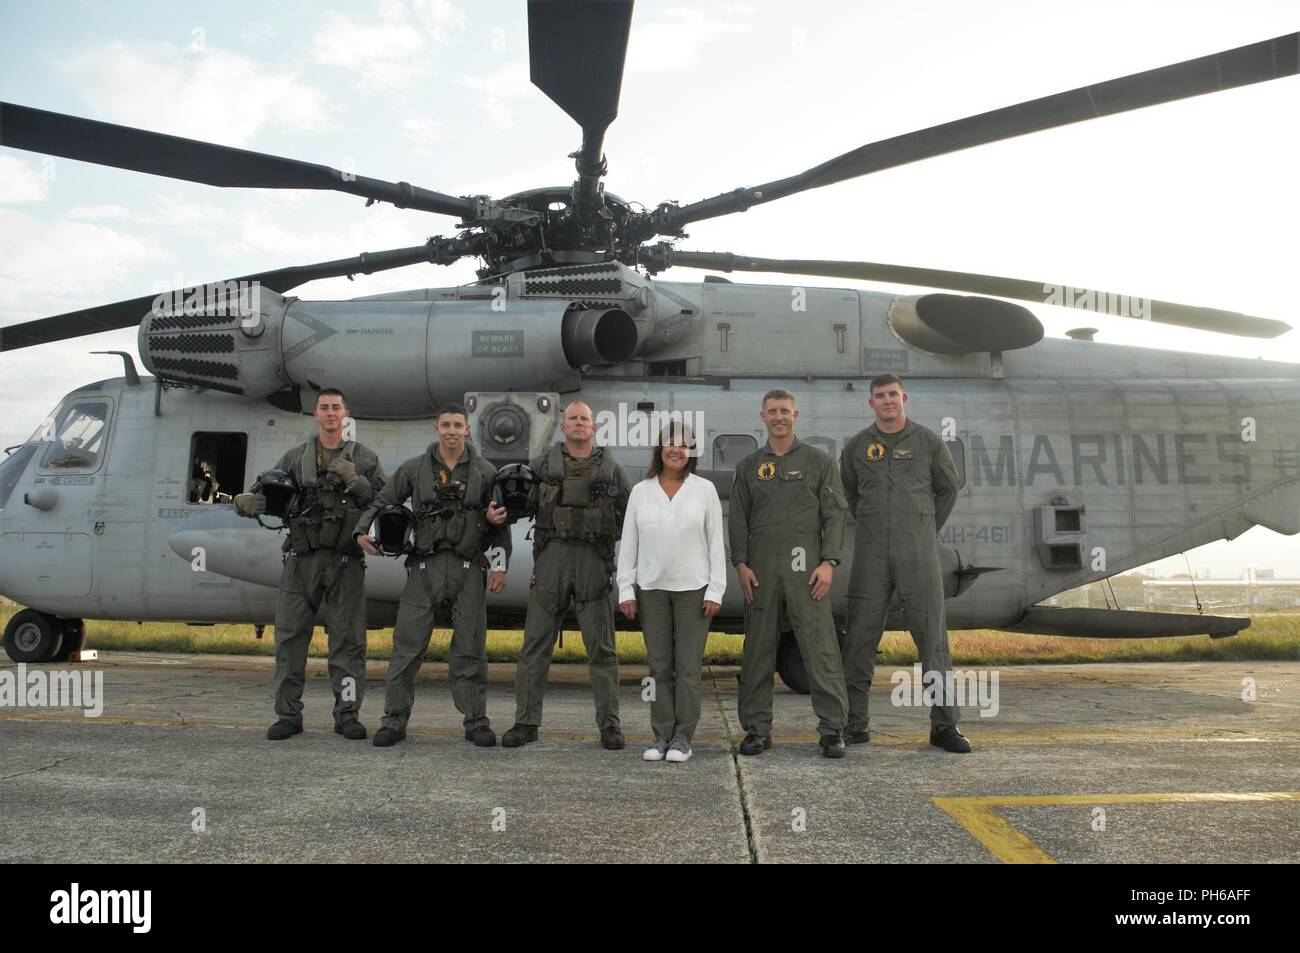 Karen Pence, the U.S. second lady, poses for a photo with Marines with Special Purpose Marine Air-Ground Task Force - Southern Command before boarding a CH-53E Super Stallion helicopter at La Aurora International Airport in Guatemala City, Guatemala, June 28, 2018. Pence flew with Guatemalan first lady Patricia Morales to visit La Escuintla, an area damaged by volcanic eruptions by Fuego Volcano. Pence and her staff delivered care packages to families and assessed the total damage caused by the volcano that has affected the lives of millions in the area. The Marines and sailors of SPMAGTF-SC a Stock Photo